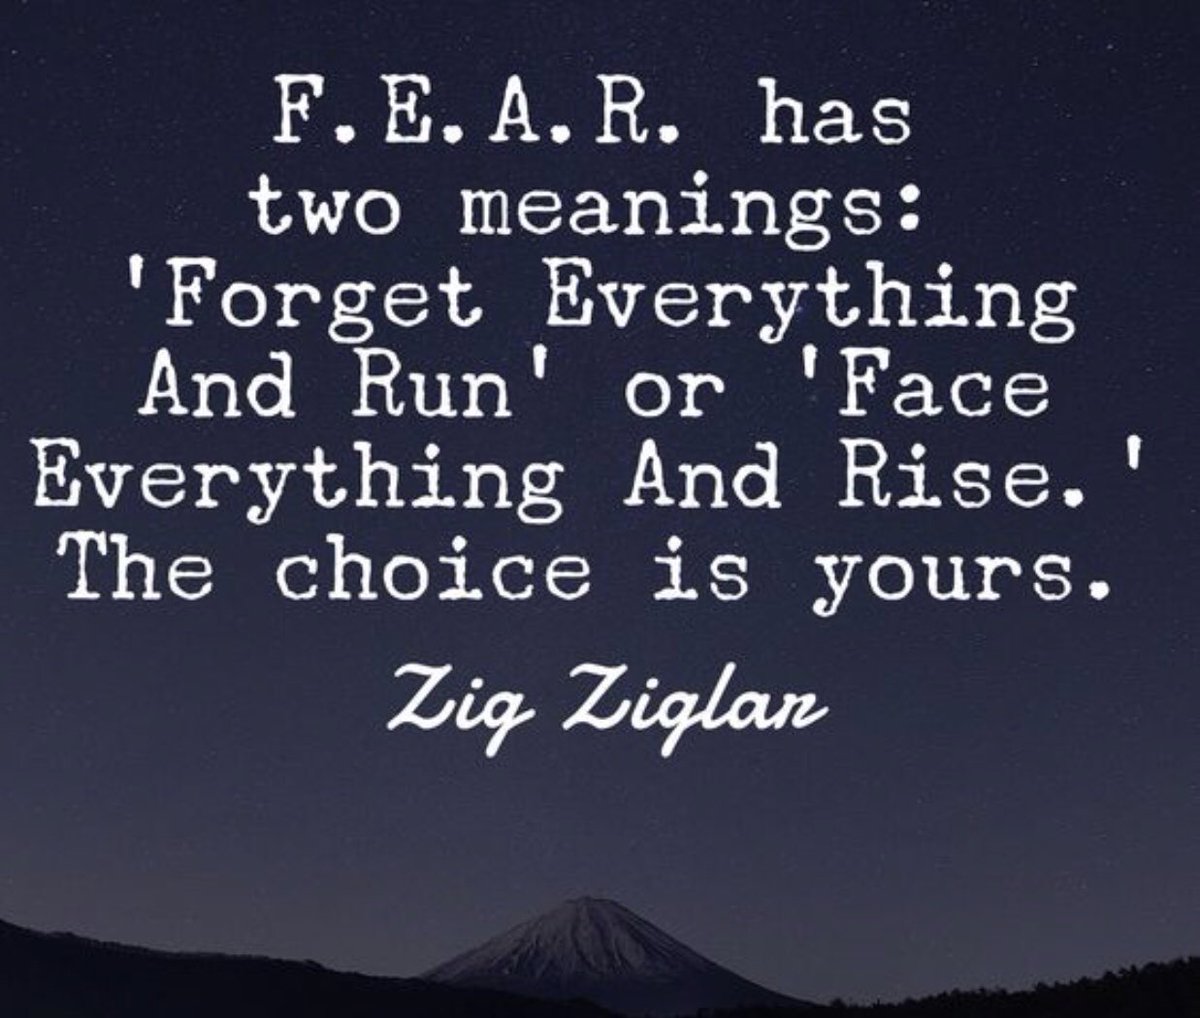 Face your fear. Overcome what holds you back. 
#overcome #Riseup #facefear #success #challenge #StandTall